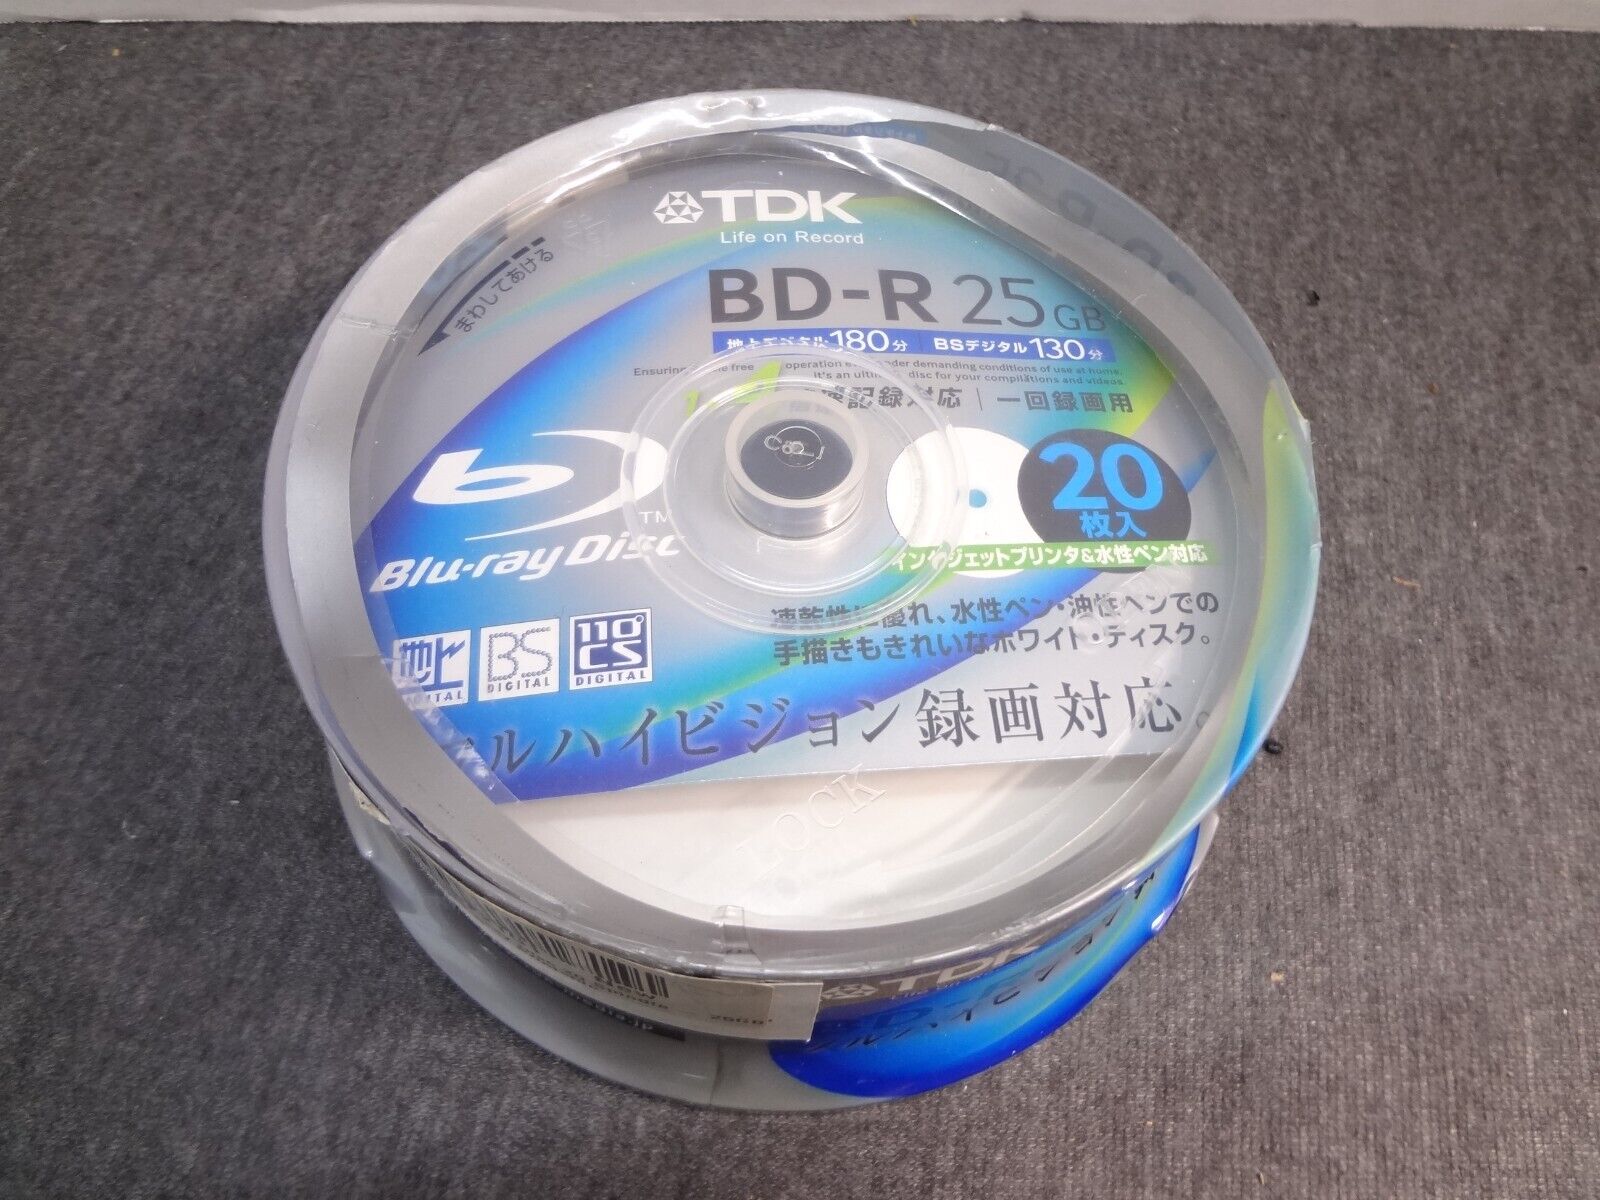 TDK Blu-ray Disc BD-R 25GB 1-4x White Printable Spindle Pack of 20 - from Japan